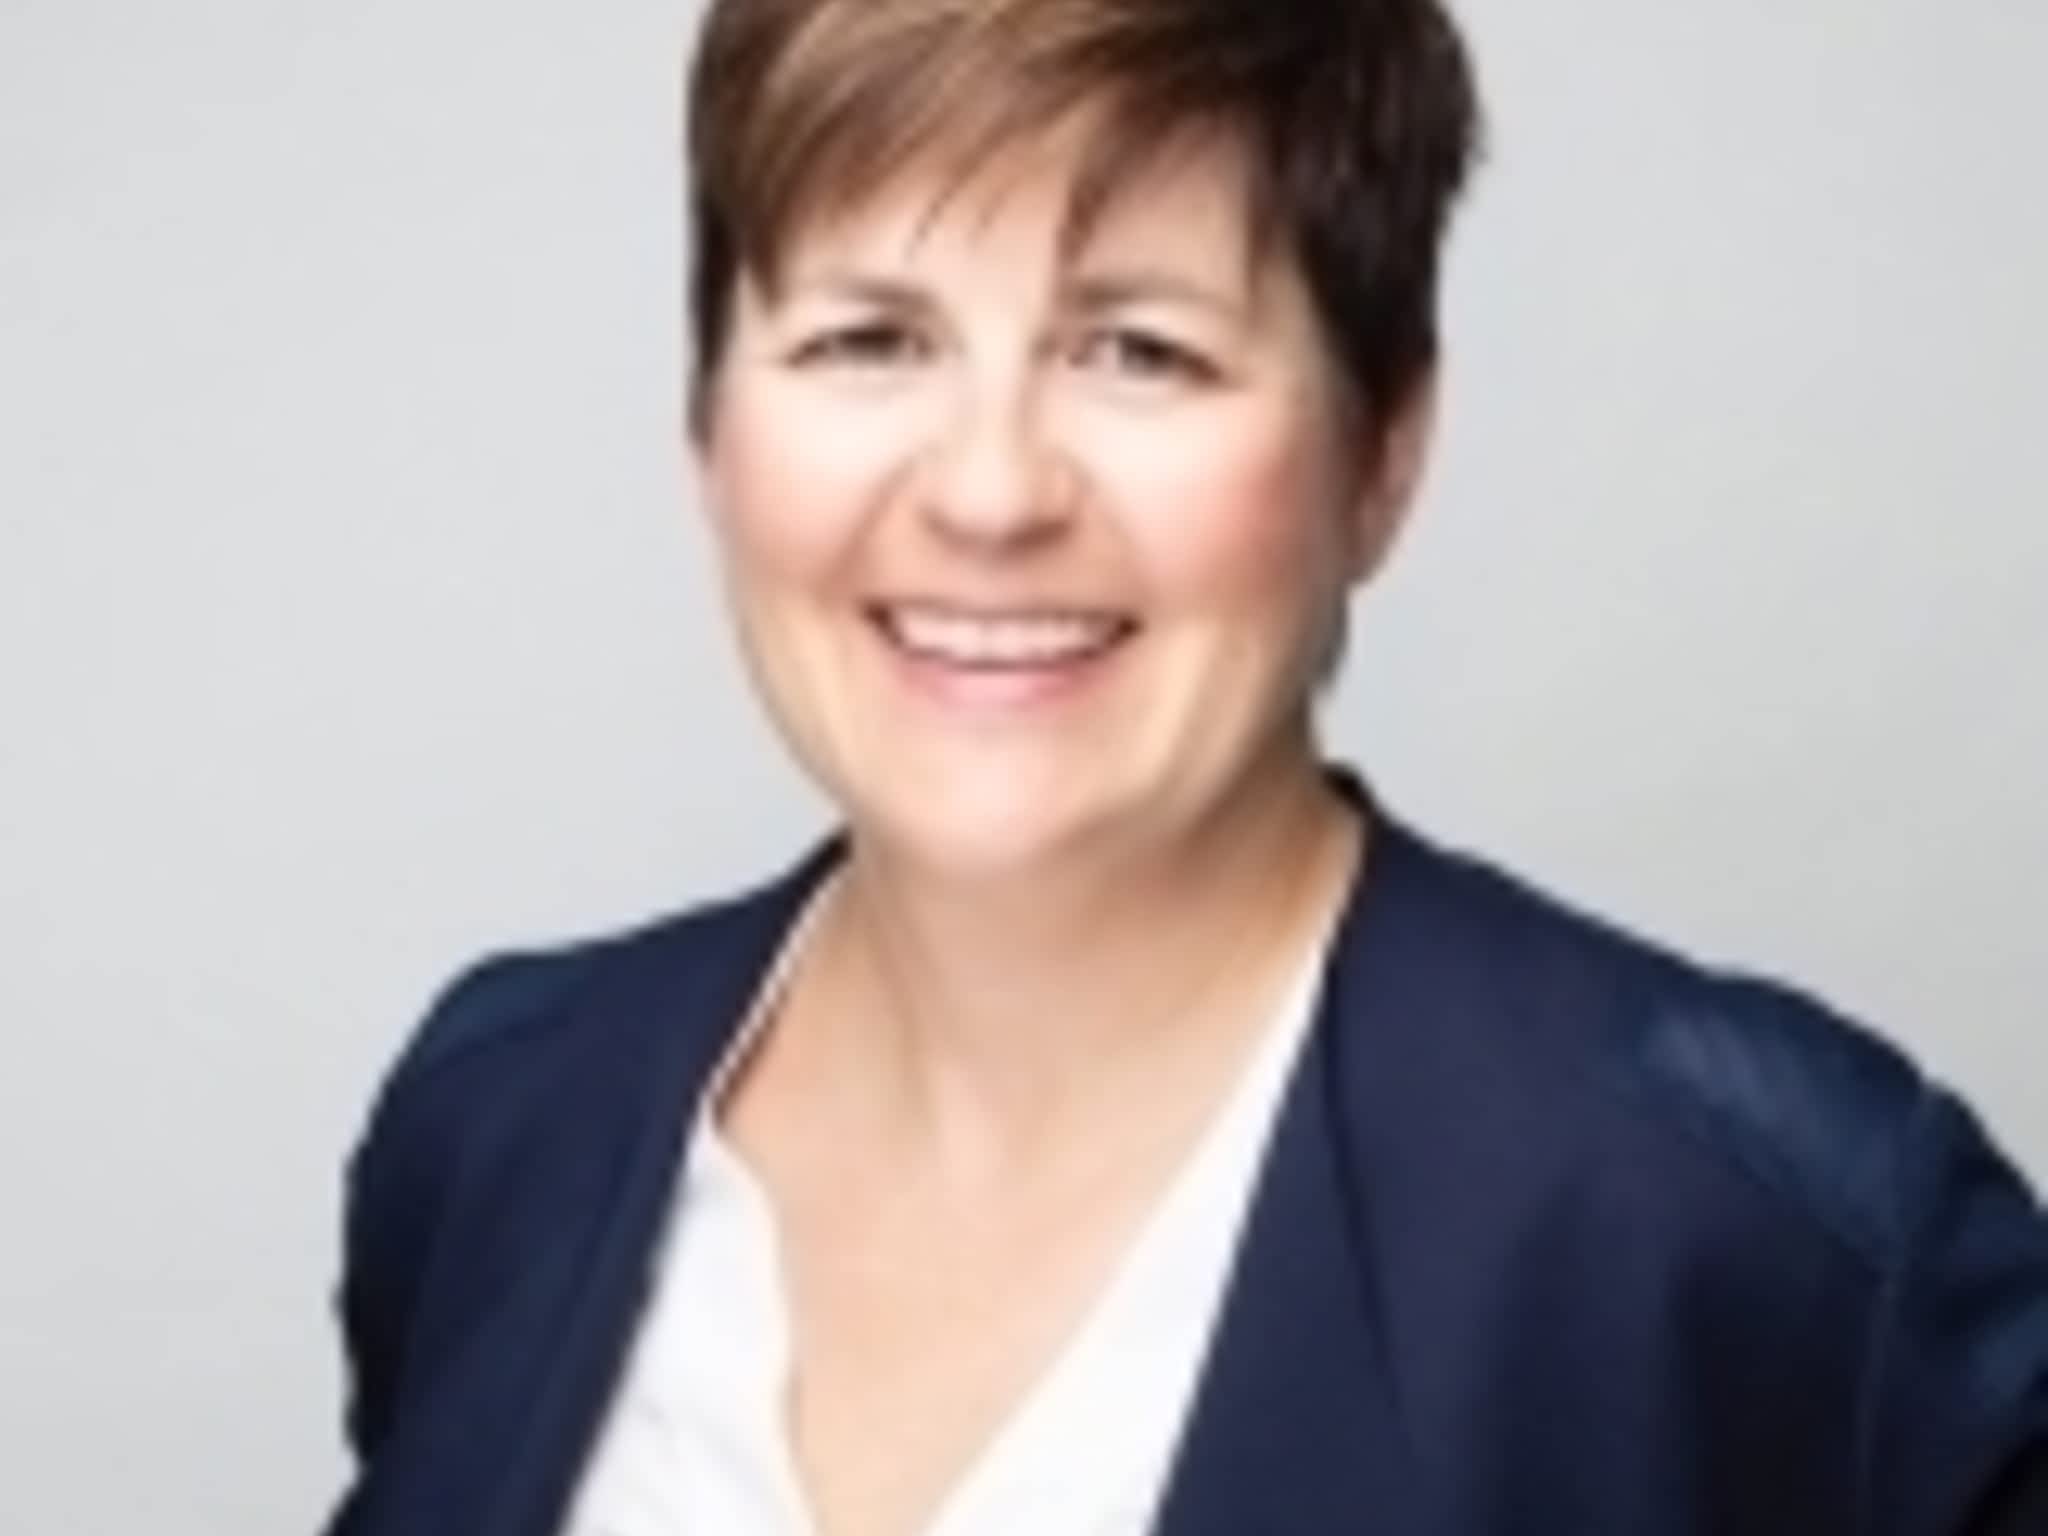 photo TD Bank Private Investment Counsel - Loralie Shinkaruk - Closed